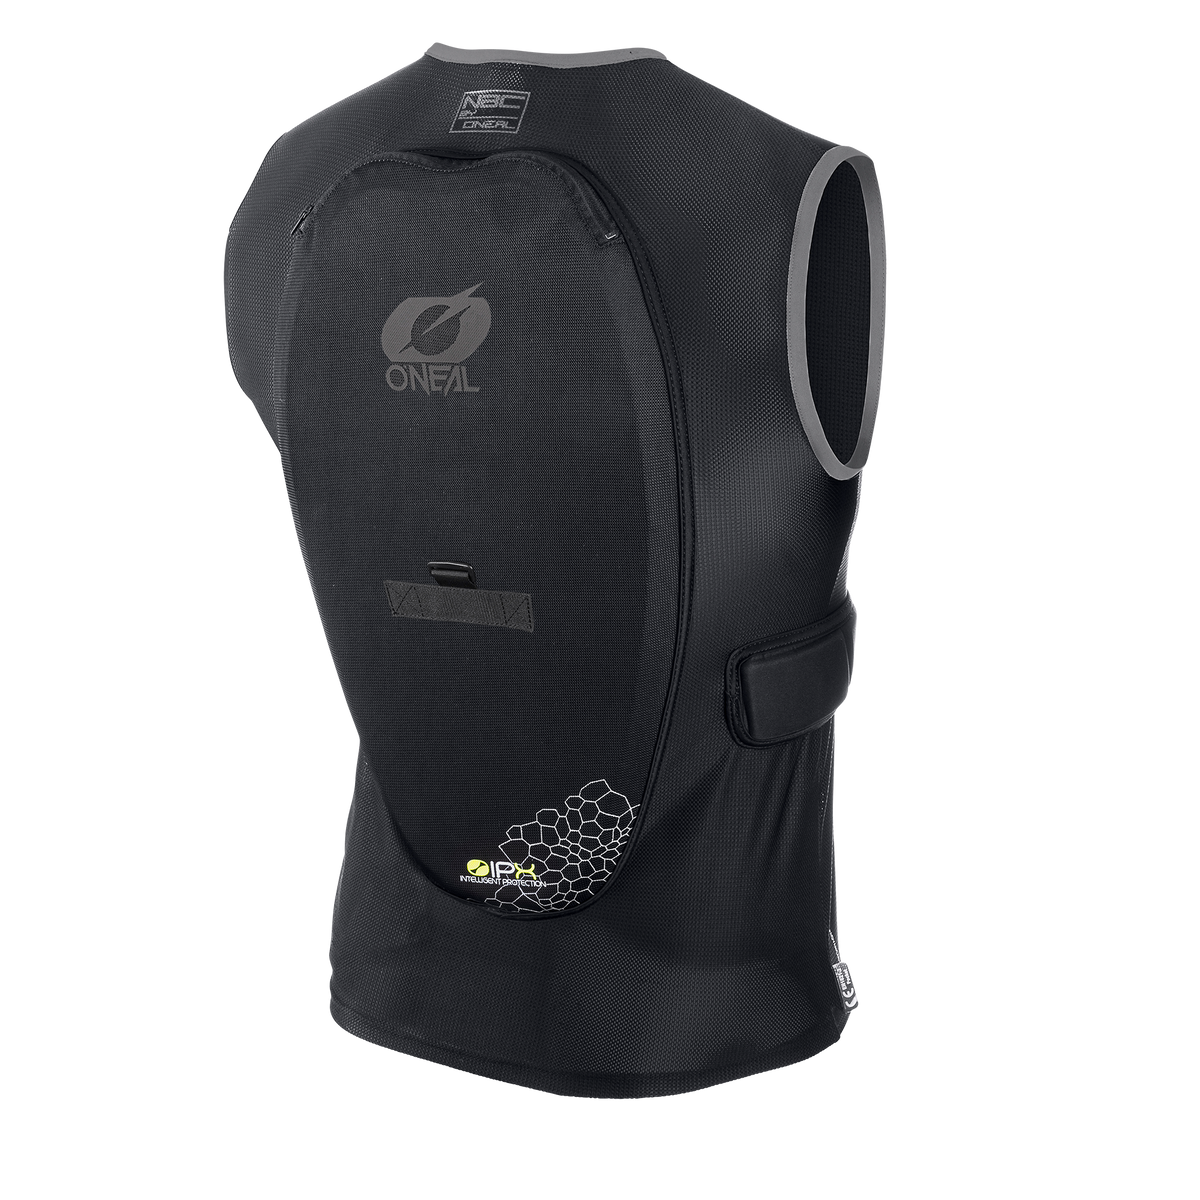 https://cdn.oneal.eu/assets/importedProductImages/PROTECTION/BODY%20ARMOUR/BP%20FAMILY/VEST/black/2021_ONeal_BP_Protector_VEST_black_back.png